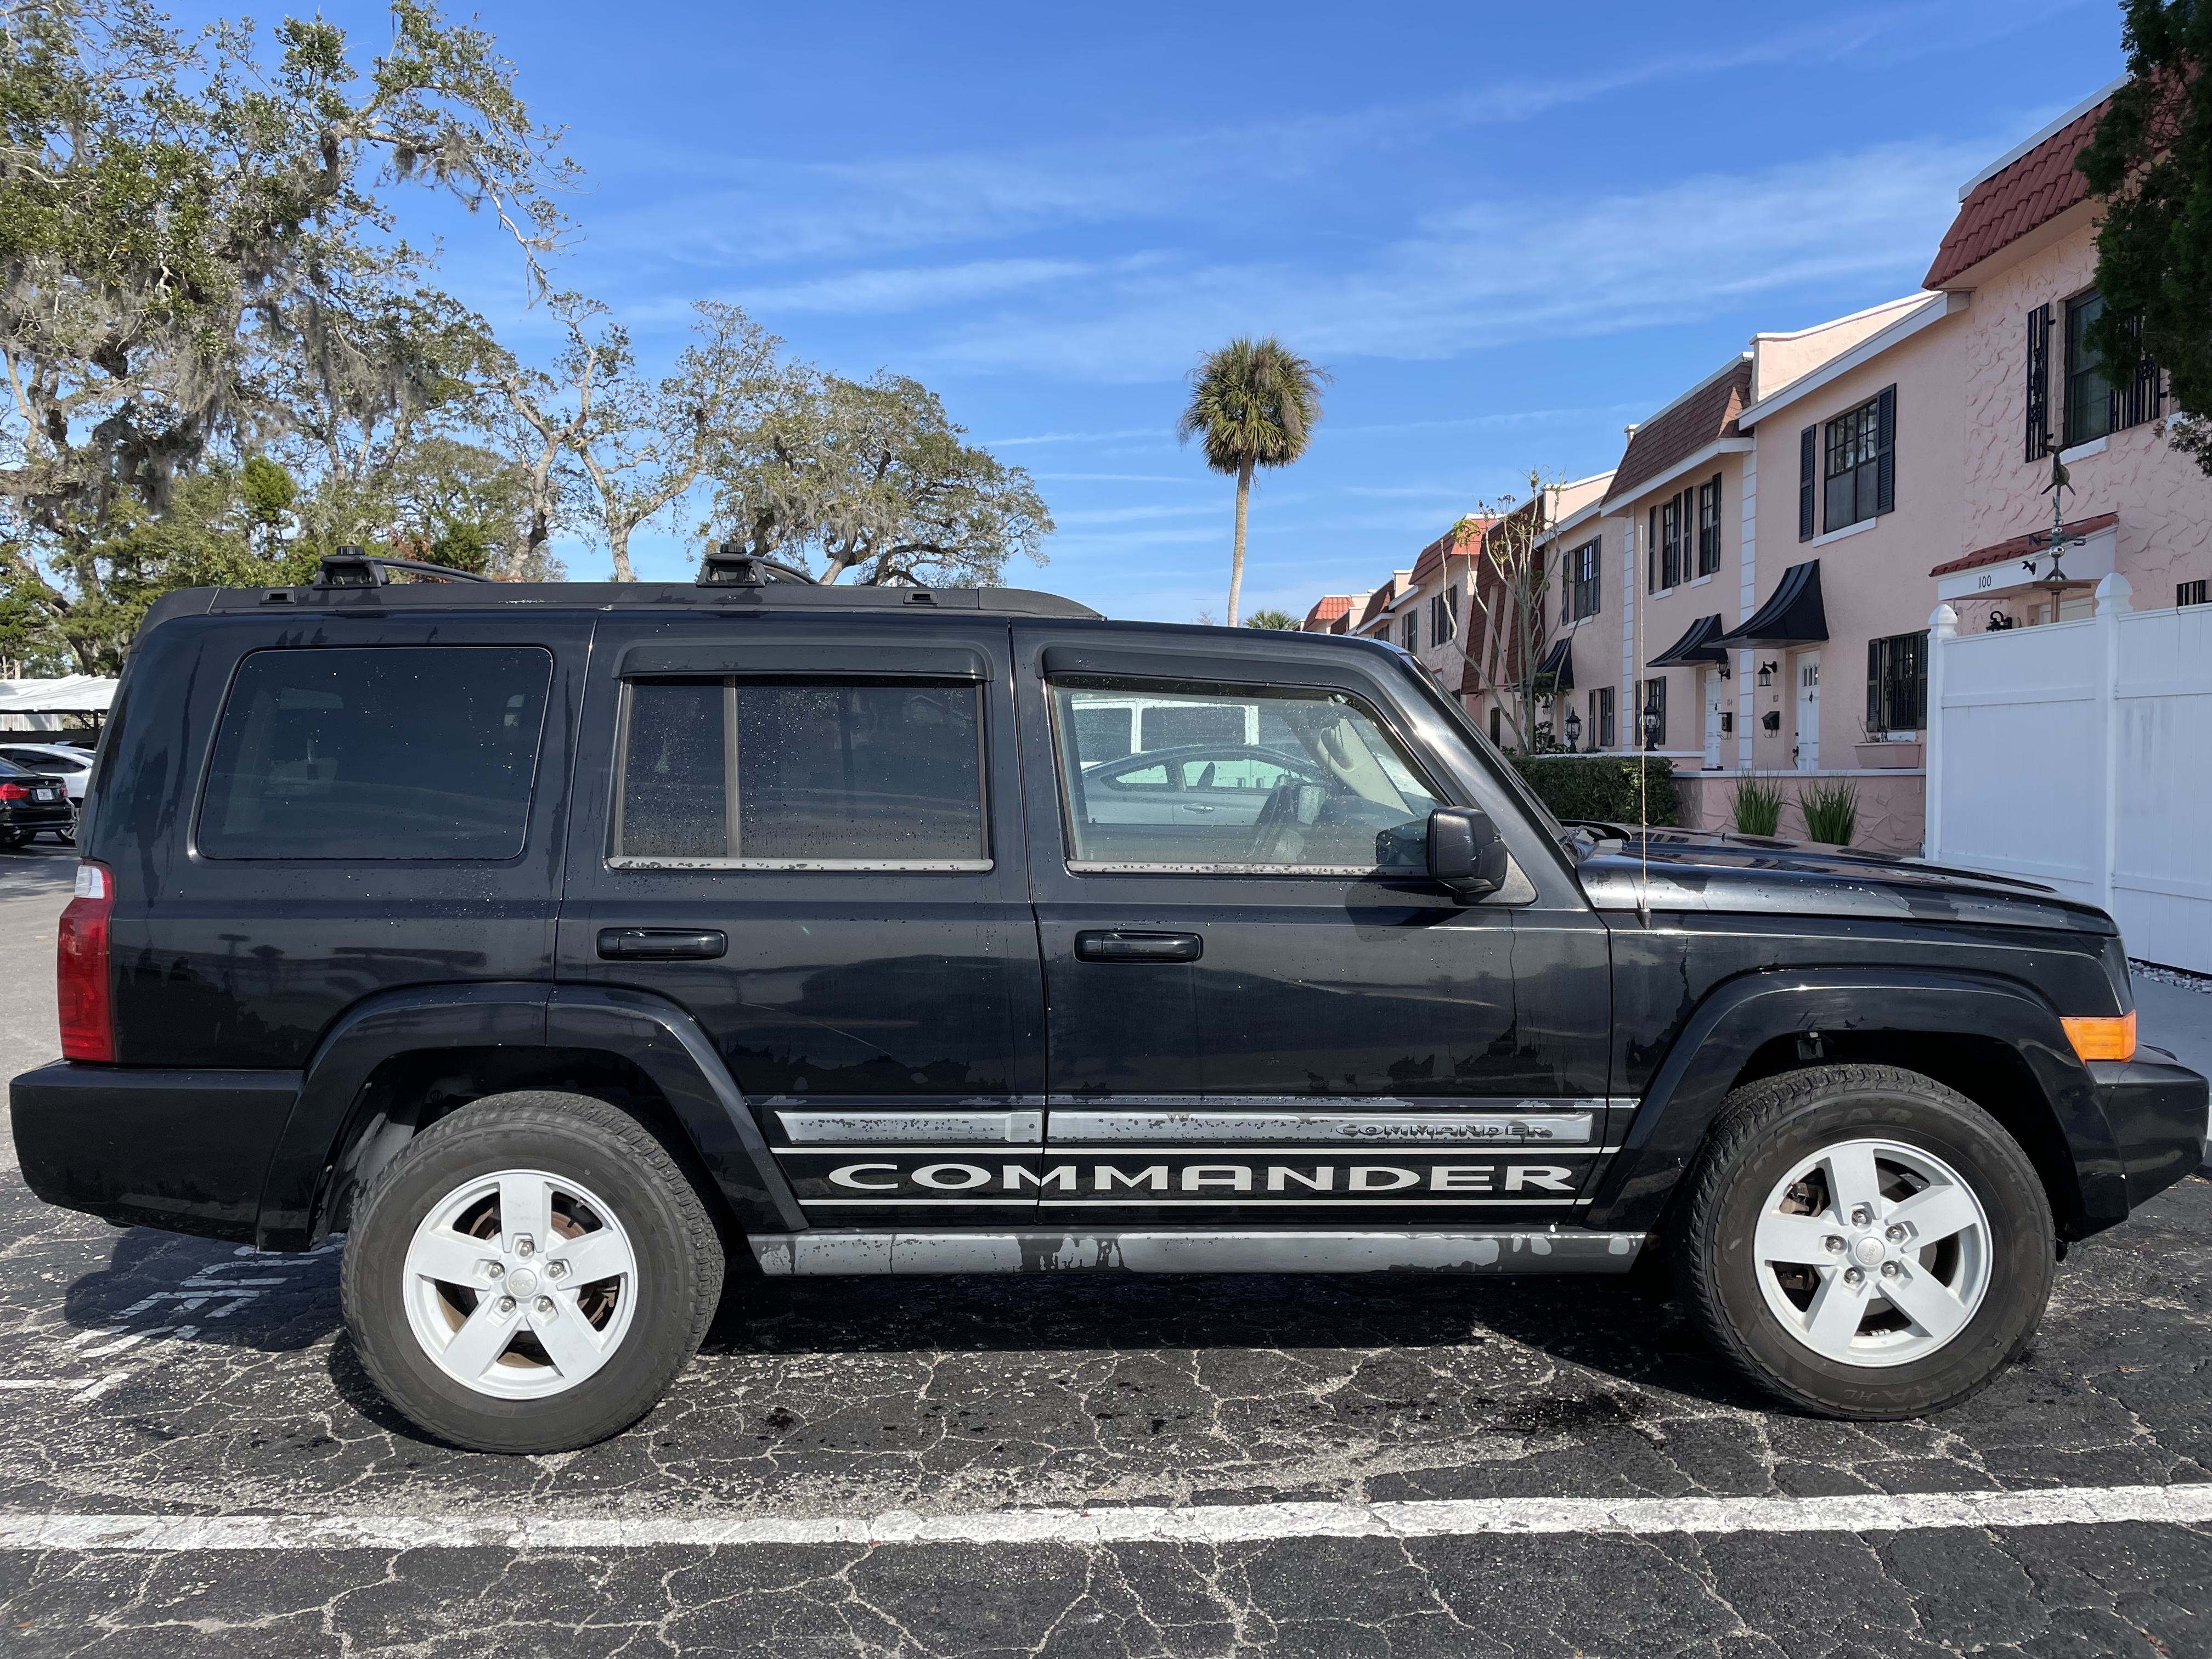 Used Jeep Commander for Sale Near Me in Deland, FL - Autotrader